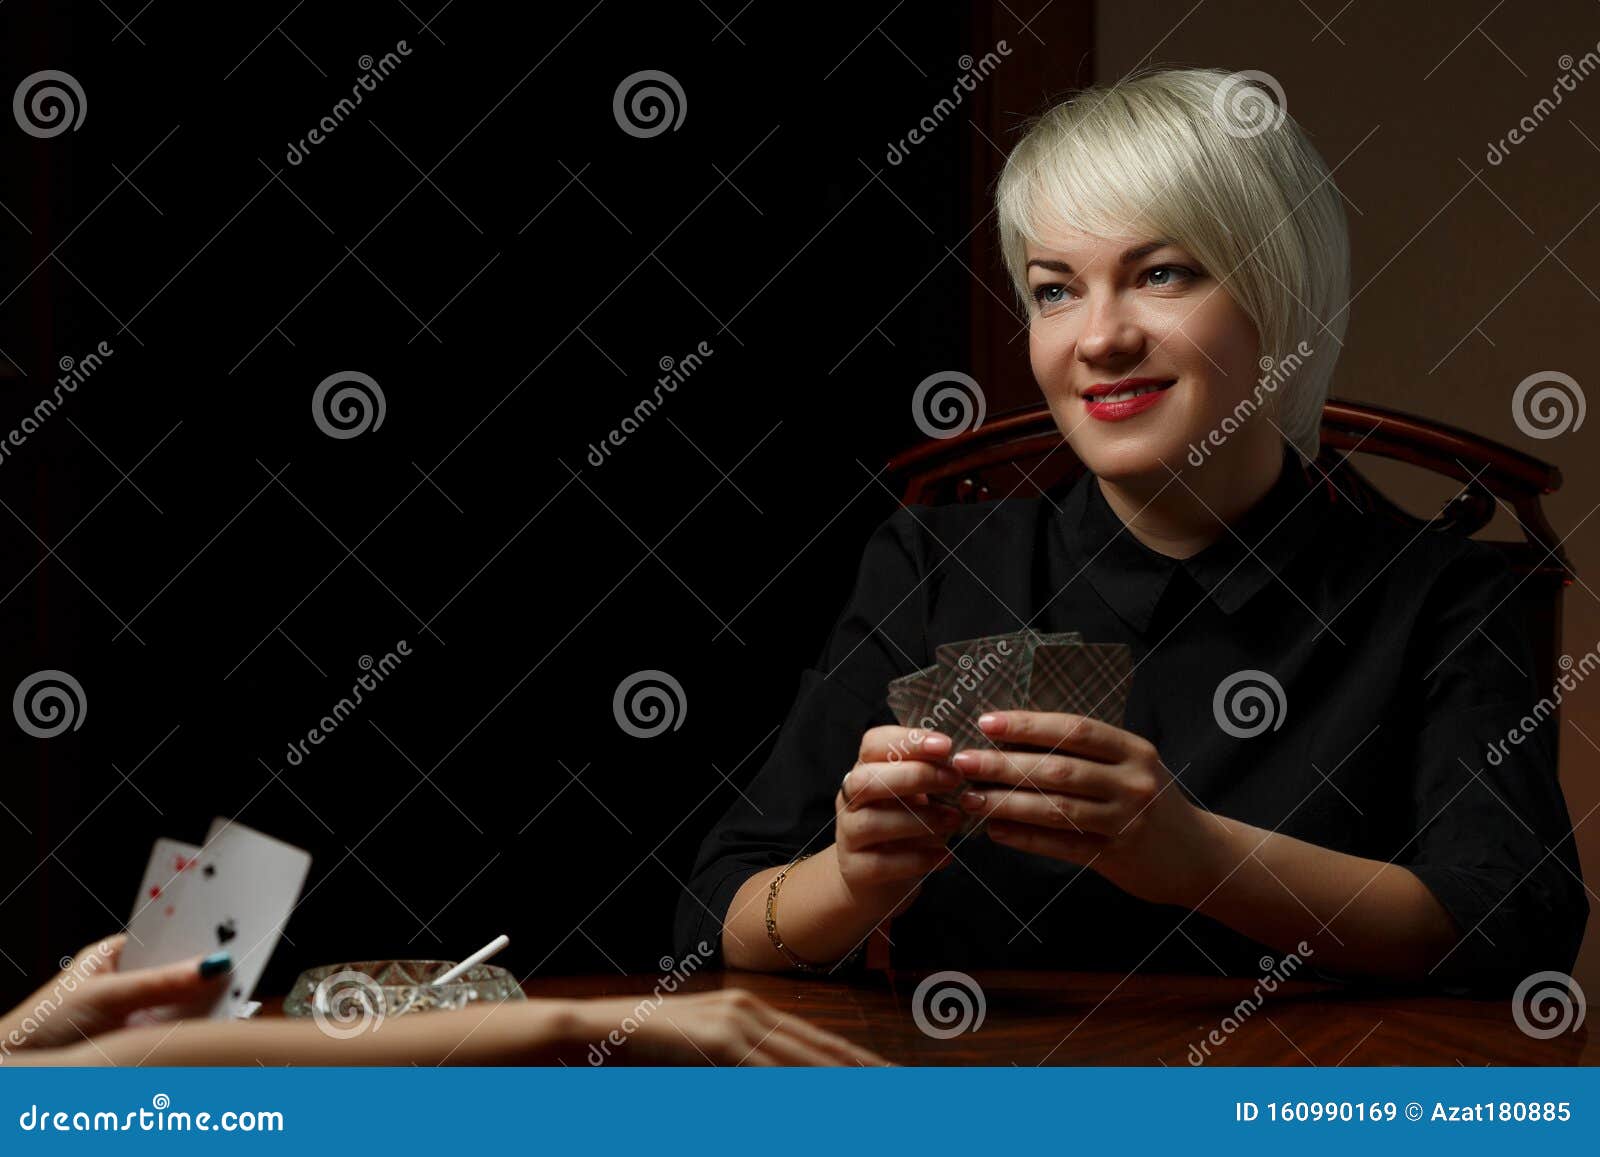 A Young Caucasian Blonde in Black Clothes is Sitting at a Table and ...